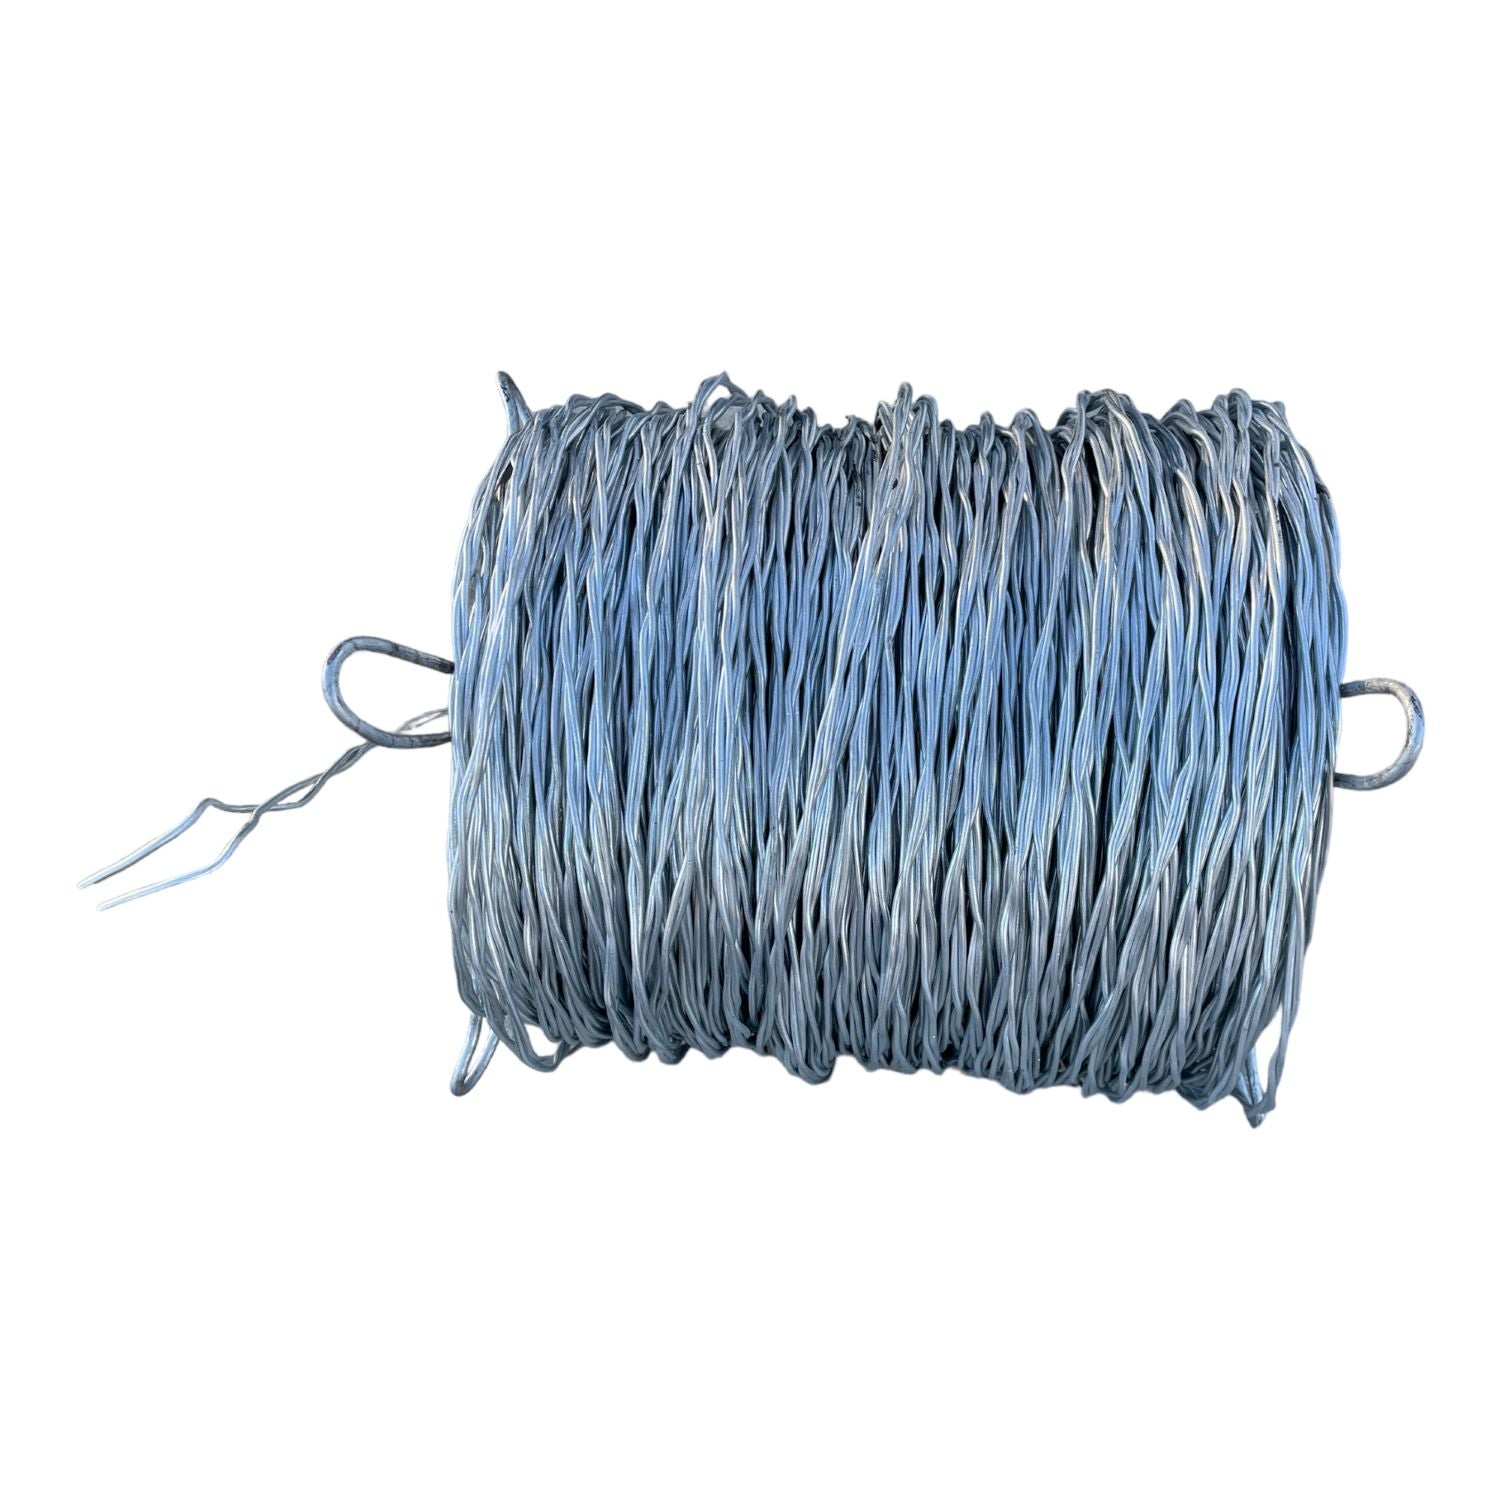 Barbless Wire Roll - Twisted Fence Wire 12.5 ga - Sandbaggy